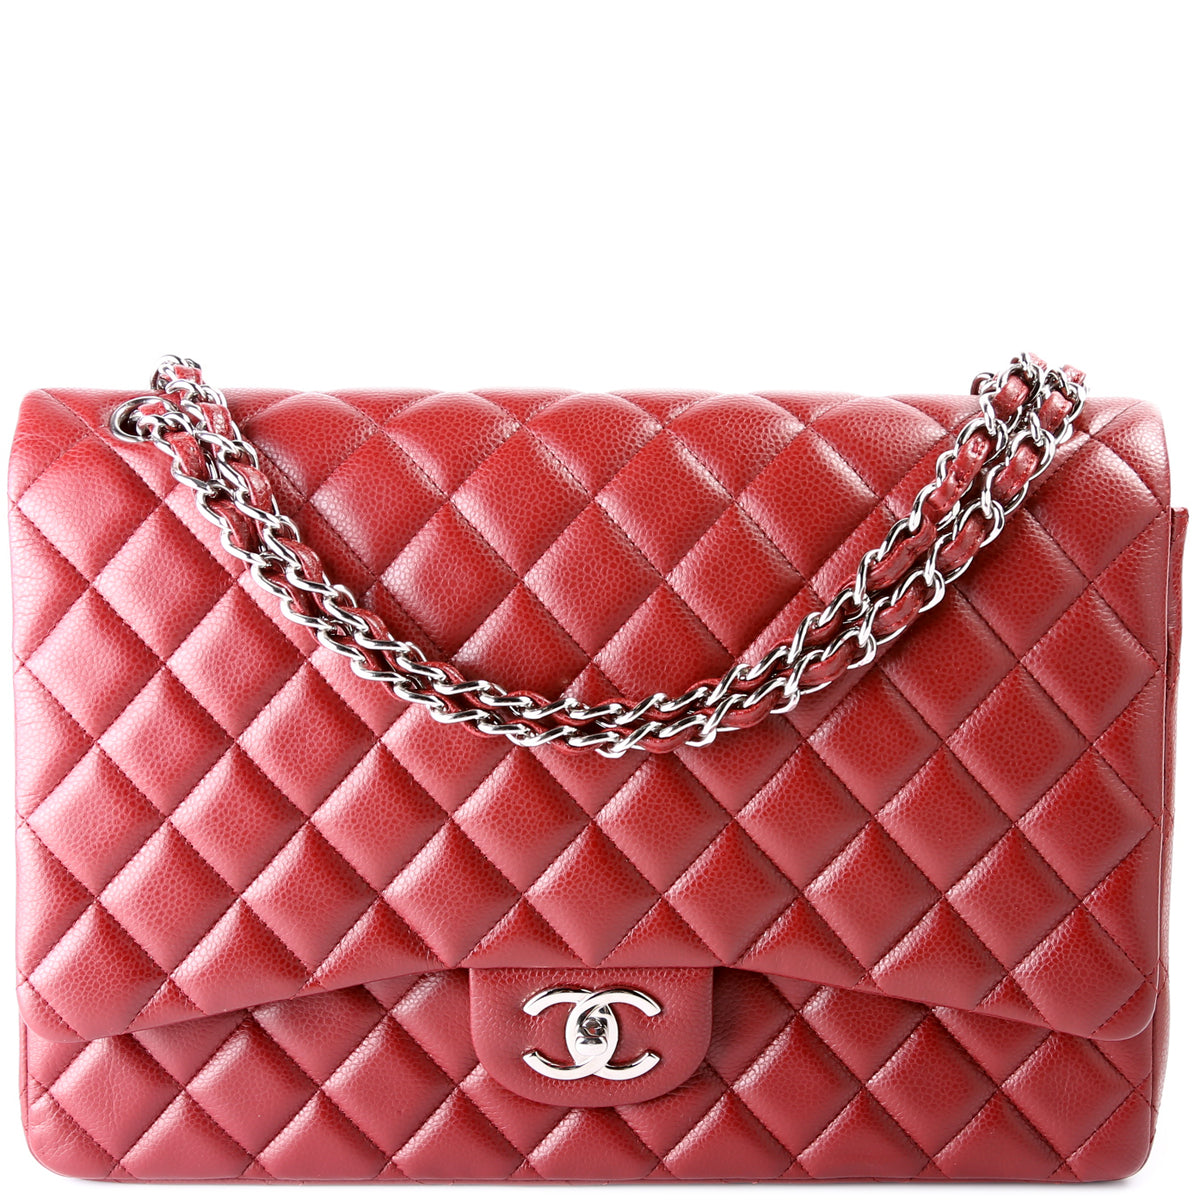 A Classic Chanel Handbag Will Now Cost You $10,000 - Fashionista